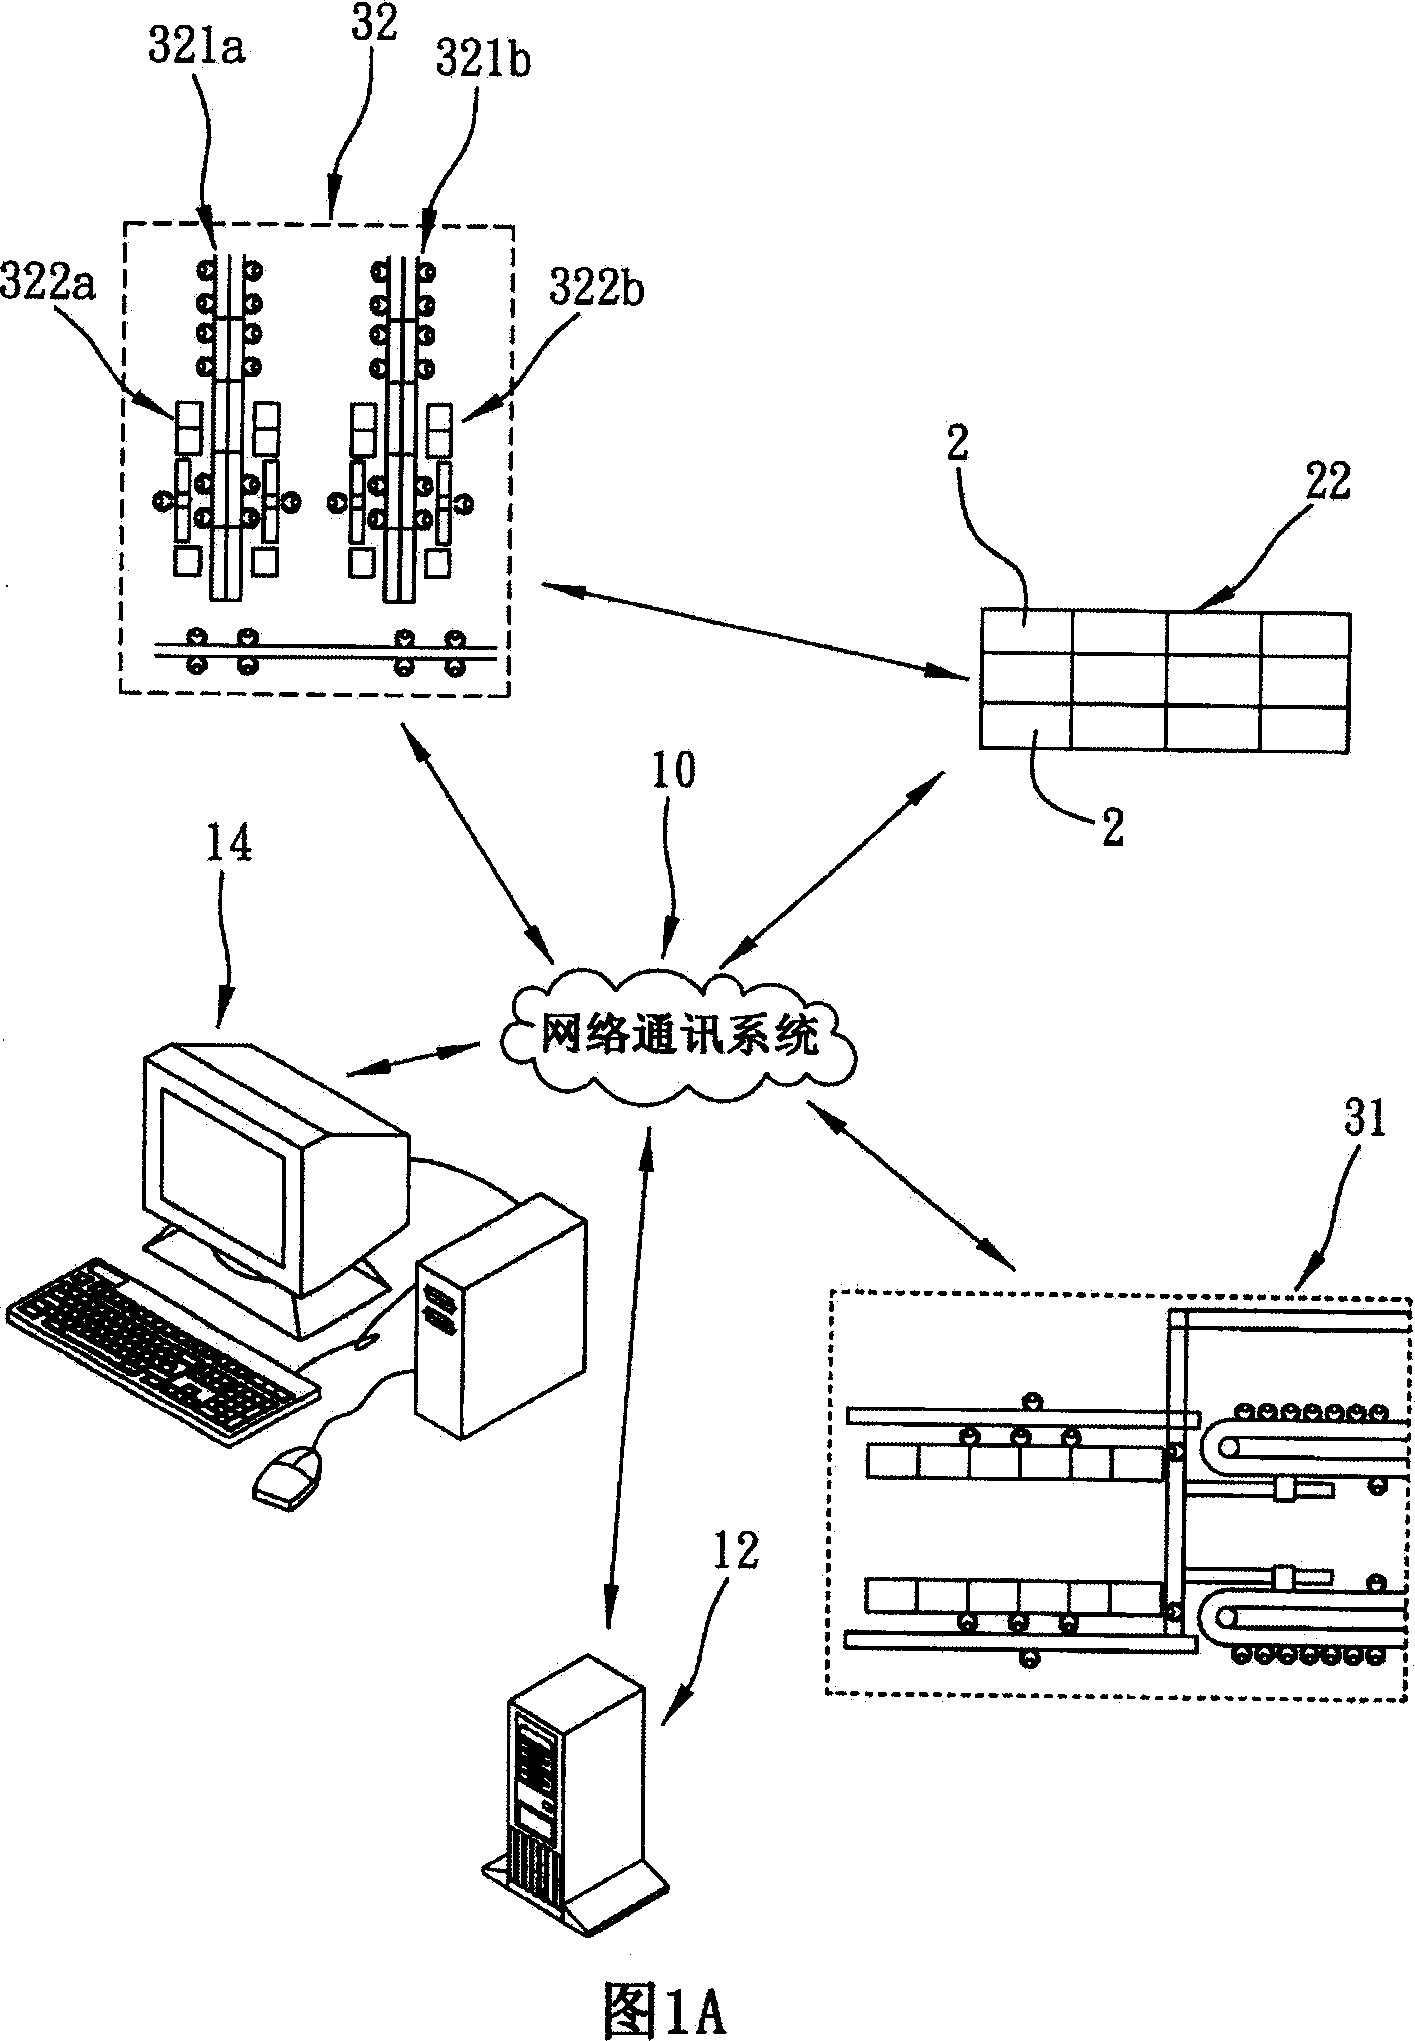 Material management method and system